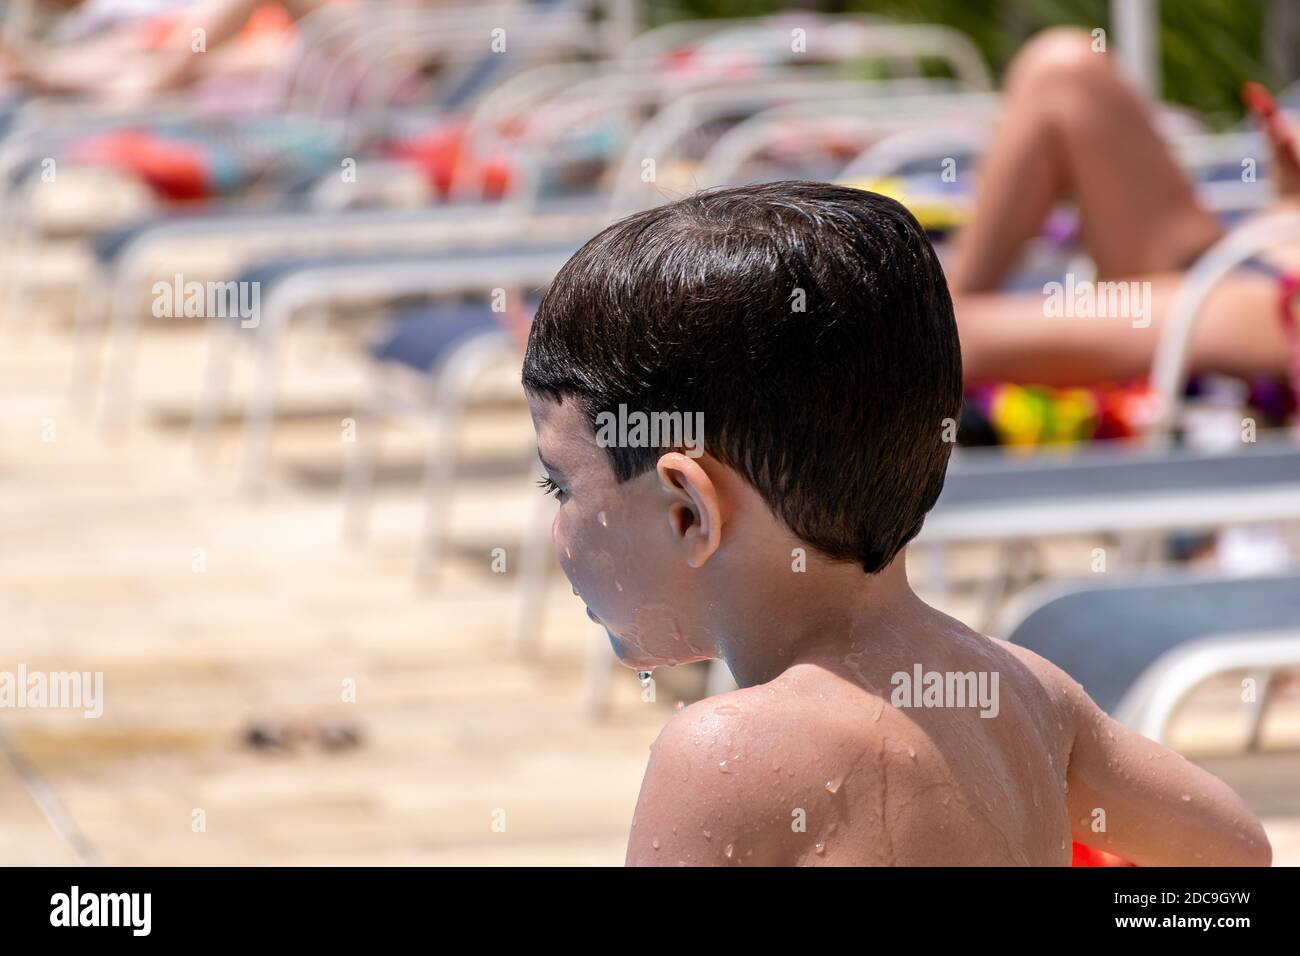 Side views of a wet child looking at the pool. Stock Photo